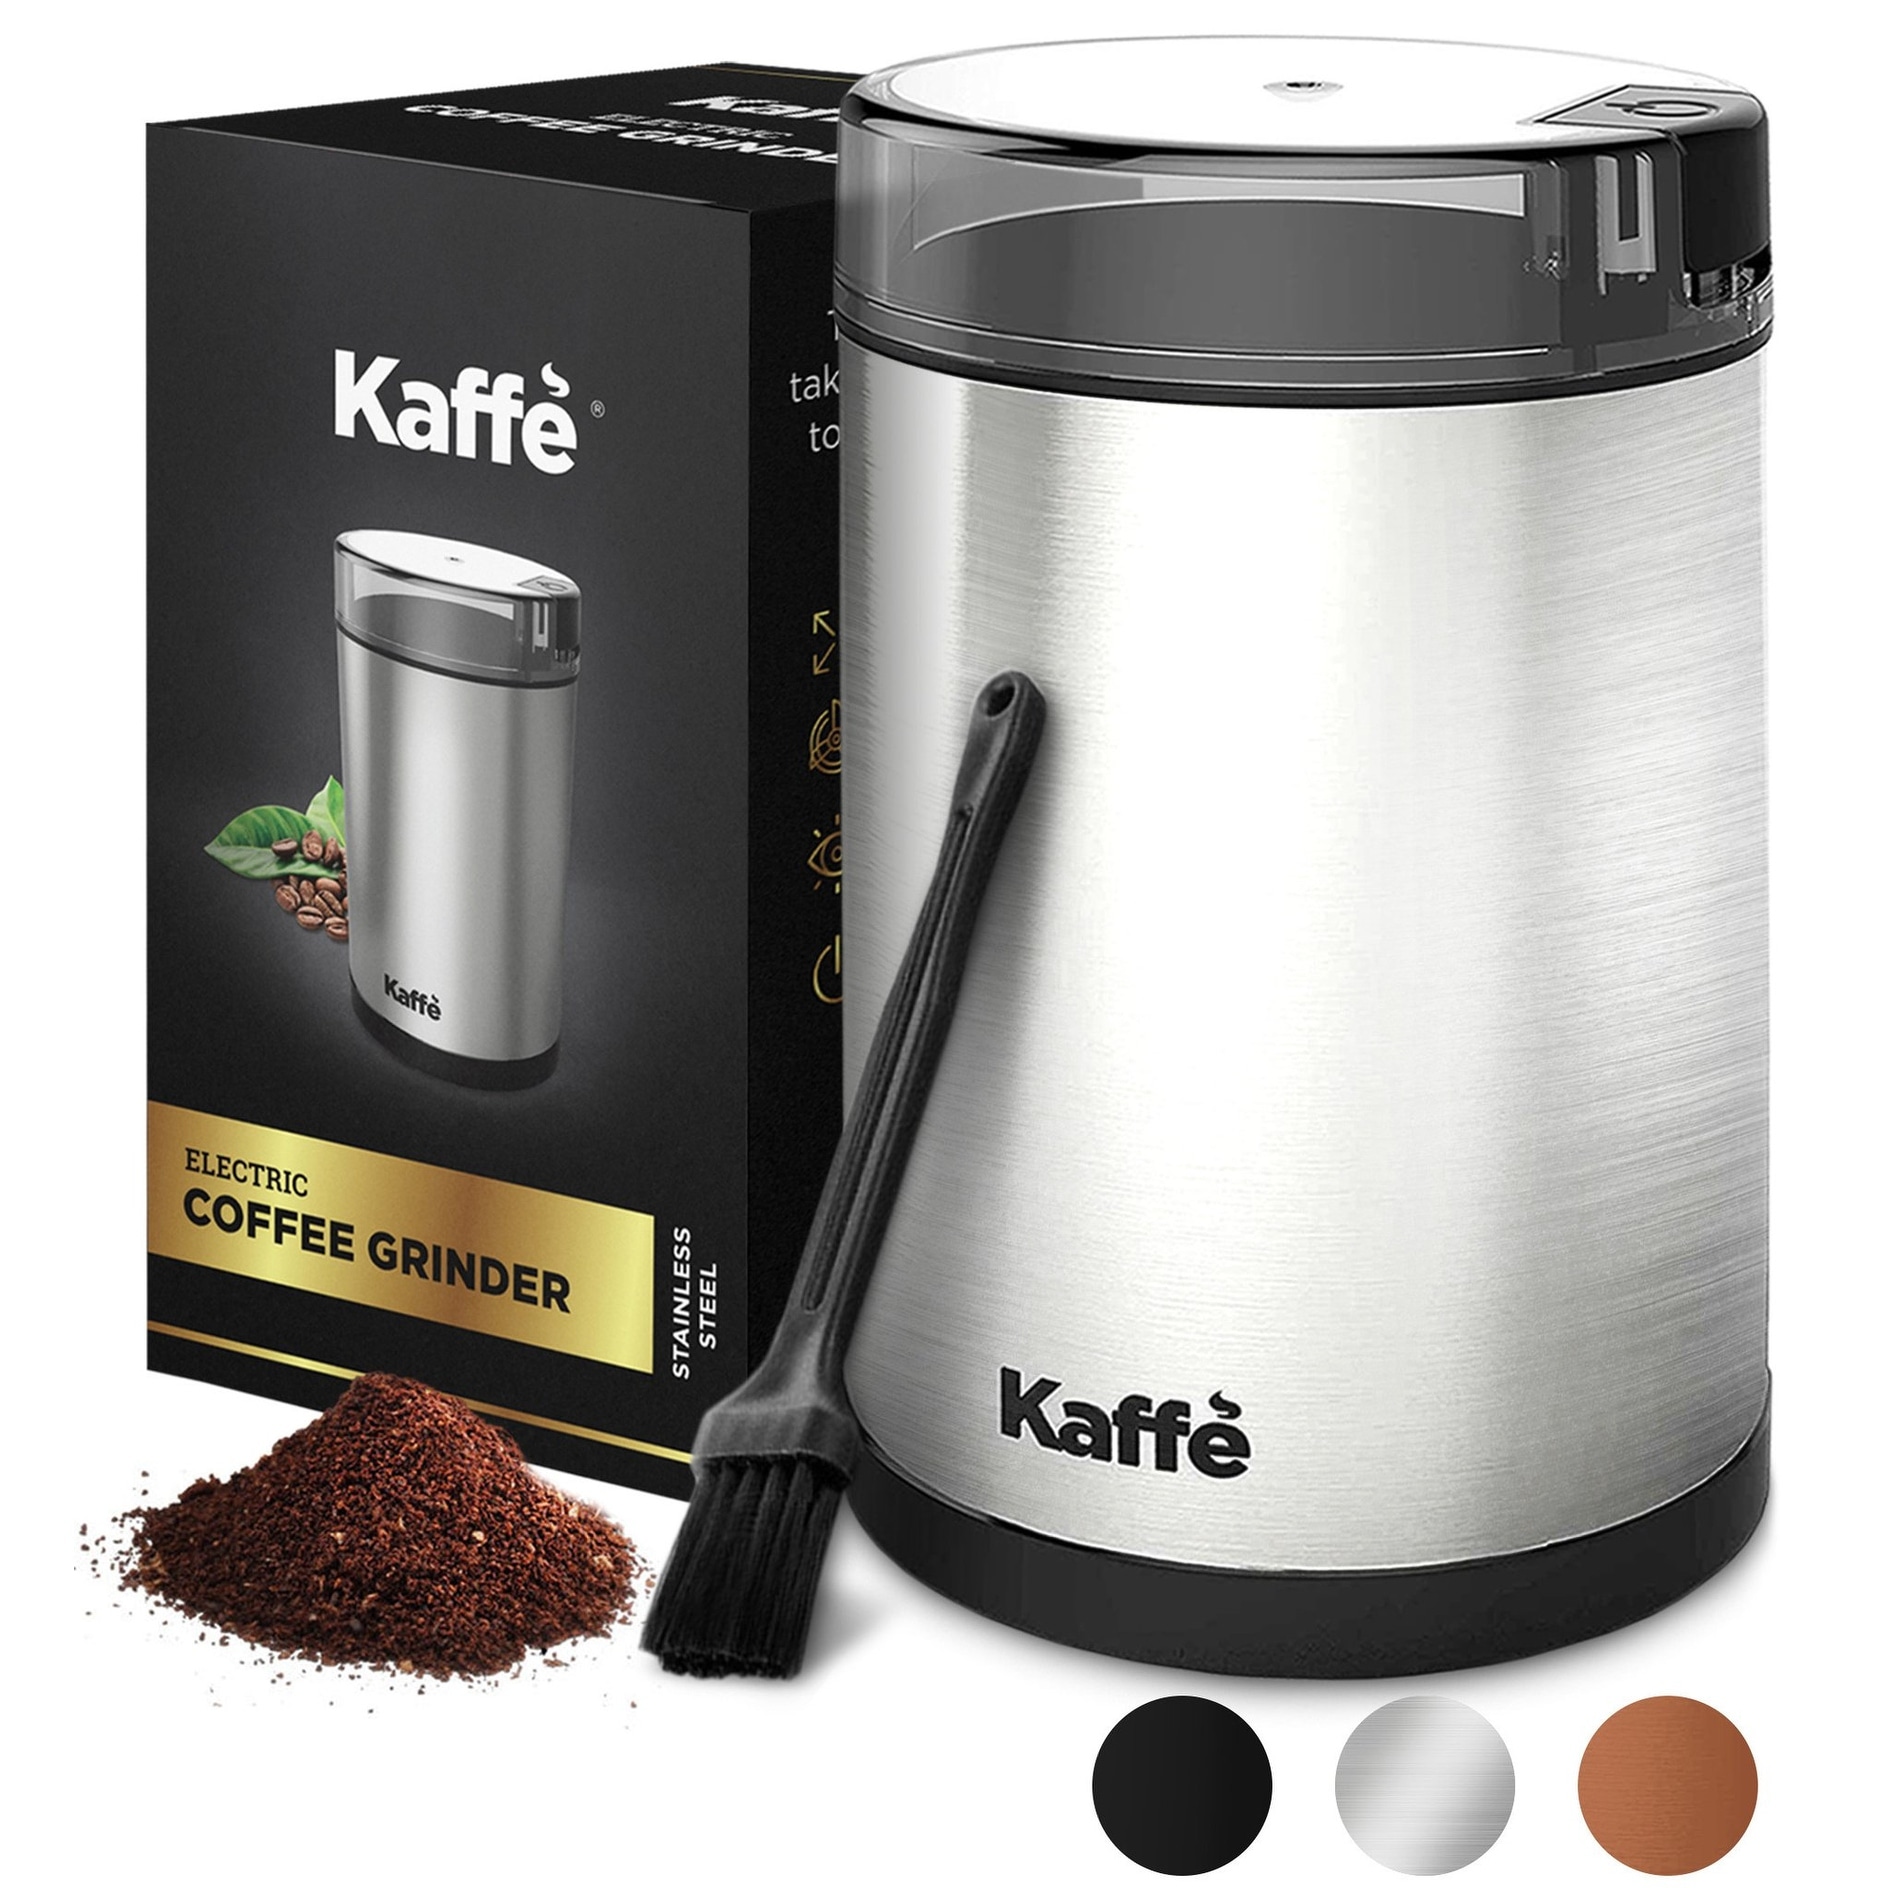 https://ak1.ostkcdn.com/images/products/is/images/direct/5df24c1498c894e0bc520cb1703cdd7900b76b4a/KF2020-Electric-Coffee-Grinder-by-Kaffe---Stainless-Steel.jpg